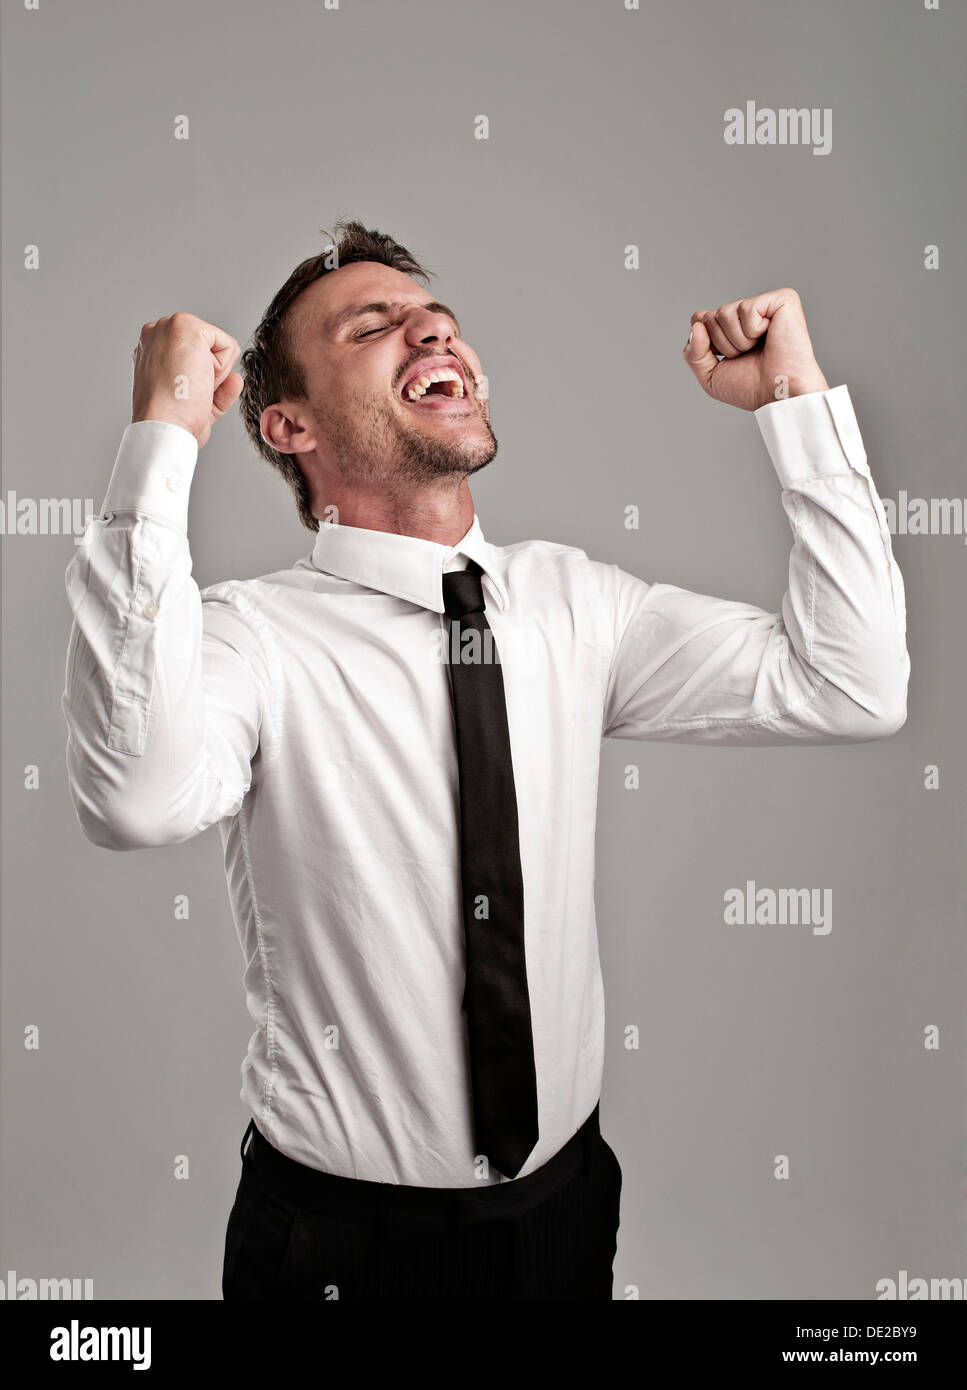 Young man wearing a shirt and a tie cheering, success, victory pose Stock  Photo - Alamy